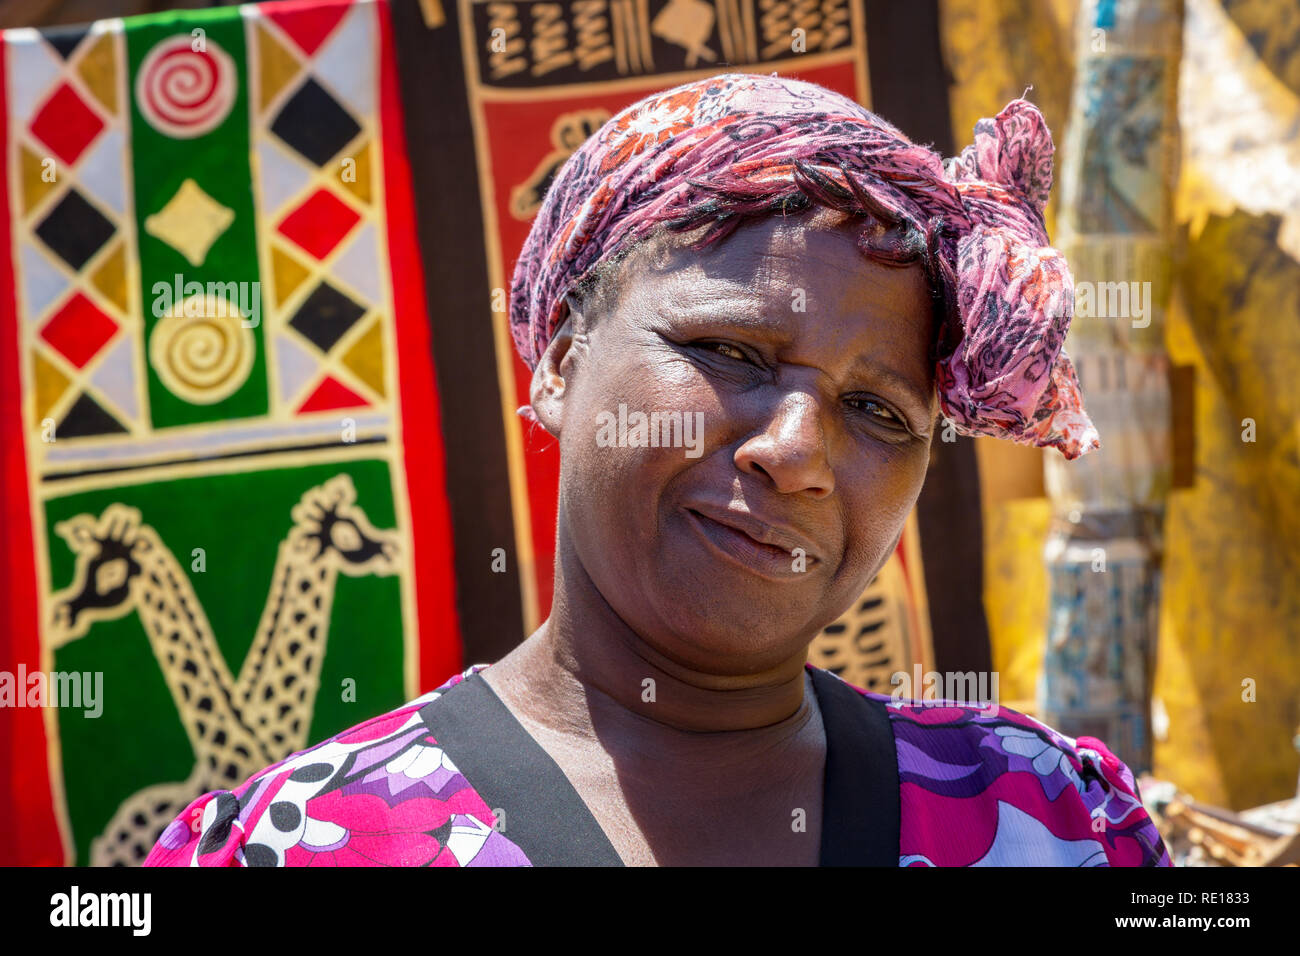 Graskop, South Africa - 5th November 2016: African women sells textiles and crafts at a street market. Stock Photo